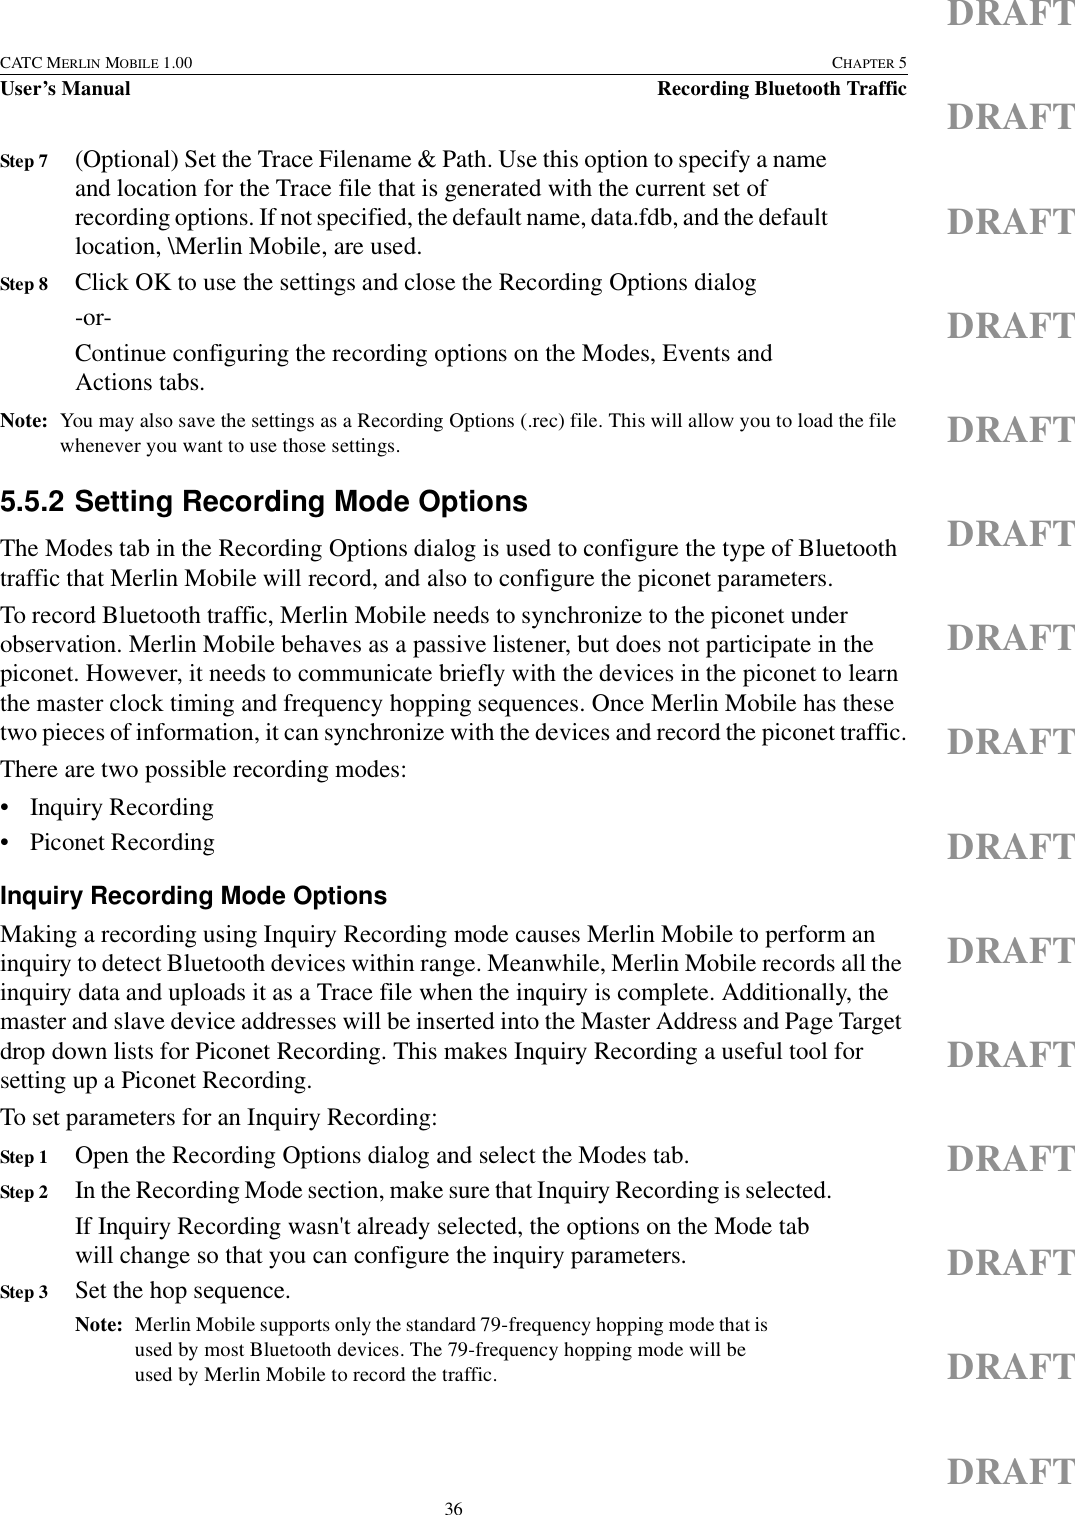 36CATC MERLIN MOBILE 1.00 CHAPTER 5User’s Manual Recording Bluetooth TrafficDRAFTDRAFTDRAFTDRAFTDRAFTDRAFTDRAFTDRAFTDRAFTDRAFTDRAFTDRAFTDRAFTDRAFTDRAFTStep 7 (Optional) Set the Trace Filename &amp; Path. Use this option to specify a name and location for the Trace file that is generated with the current set of recording options. If not specified, the default name, data.fdb, and the default location, \Merlin Mobile, are used.Step 8 Click OK to use the settings and close the Recording Options dialog-or-Continue configuring the recording options on the Modes, Events and Actions tabs.Note: You may also save the settings as a Recording Options (.rec) file. This will allow you to load the file whenever you want to use those settings.5.5.2 Setting Recording Mode OptionsThe Modes tab in the Recording Options dialog is used to configure the type of Bluetooth traffic that Merlin Mobile will record, and also to configure the piconet parameters.To record Bluetooth traffic, Merlin Mobile needs to synchronize to the piconet under observation. Merlin Mobile behaves as a passive listener, but does not participate in the piconet. However, it needs to communicate briefly with the devices in the piconet to learn the master clock timing and frequency hopping sequences. Once Merlin Mobile has these two pieces of information, it can synchronize with the devices and record the piconet traffic.There are two possible recording modes:• Inquiry Recording • Piconet Recording Inquiry Recording Mode OptionsMaking a recording using Inquiry Recording mode causes Merlin Mobile to perform an inquiry to detect Bluetooth devices within range. Meanwhile, Merlin Mobile records all the inquiry data and uploads it as a Trace file when the inquiry is complete. Additionally, the master and slave device addresses will be inserted into the Master Address and Page Target drop down lists for Piconet Recording. This makes Inquiry Recording a useful tool for setting up a Piconet Recording.To set parameters for an Inquiry Recording:Step 1 Open the Recording Options dialog and select the Modes tab.Step 2 In the Recording Mode section, make sure that Inquiry Recording is selected.If Inquiry Recording wasn&apos;t already selected, the options on the Mode tab will change so that you can configure the inquiry parameters.Step 3 Set the hop sequence.Note: Merlin Mobile supports only the standard 79-frequency hopping mode that is used by most Bluetooth devices. The 79-frequency hopping mode will be used by Merlin Mobile to record the traffic.